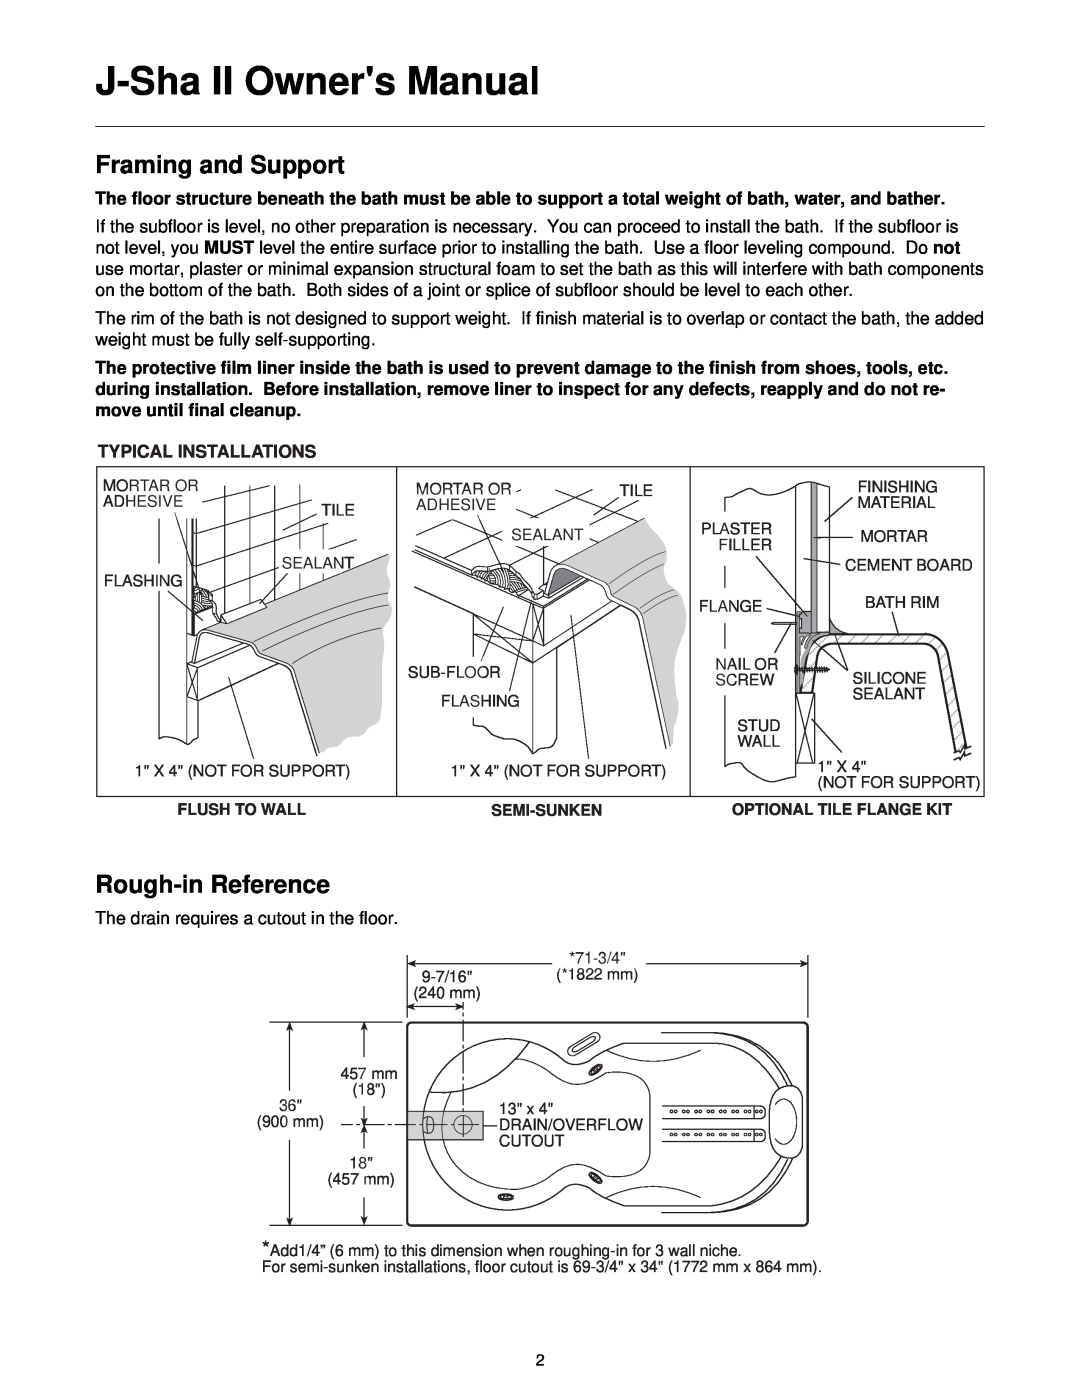 Jacuzzi J-SHA manual Framing and Support, Rough-in Reference, Typical Installations 